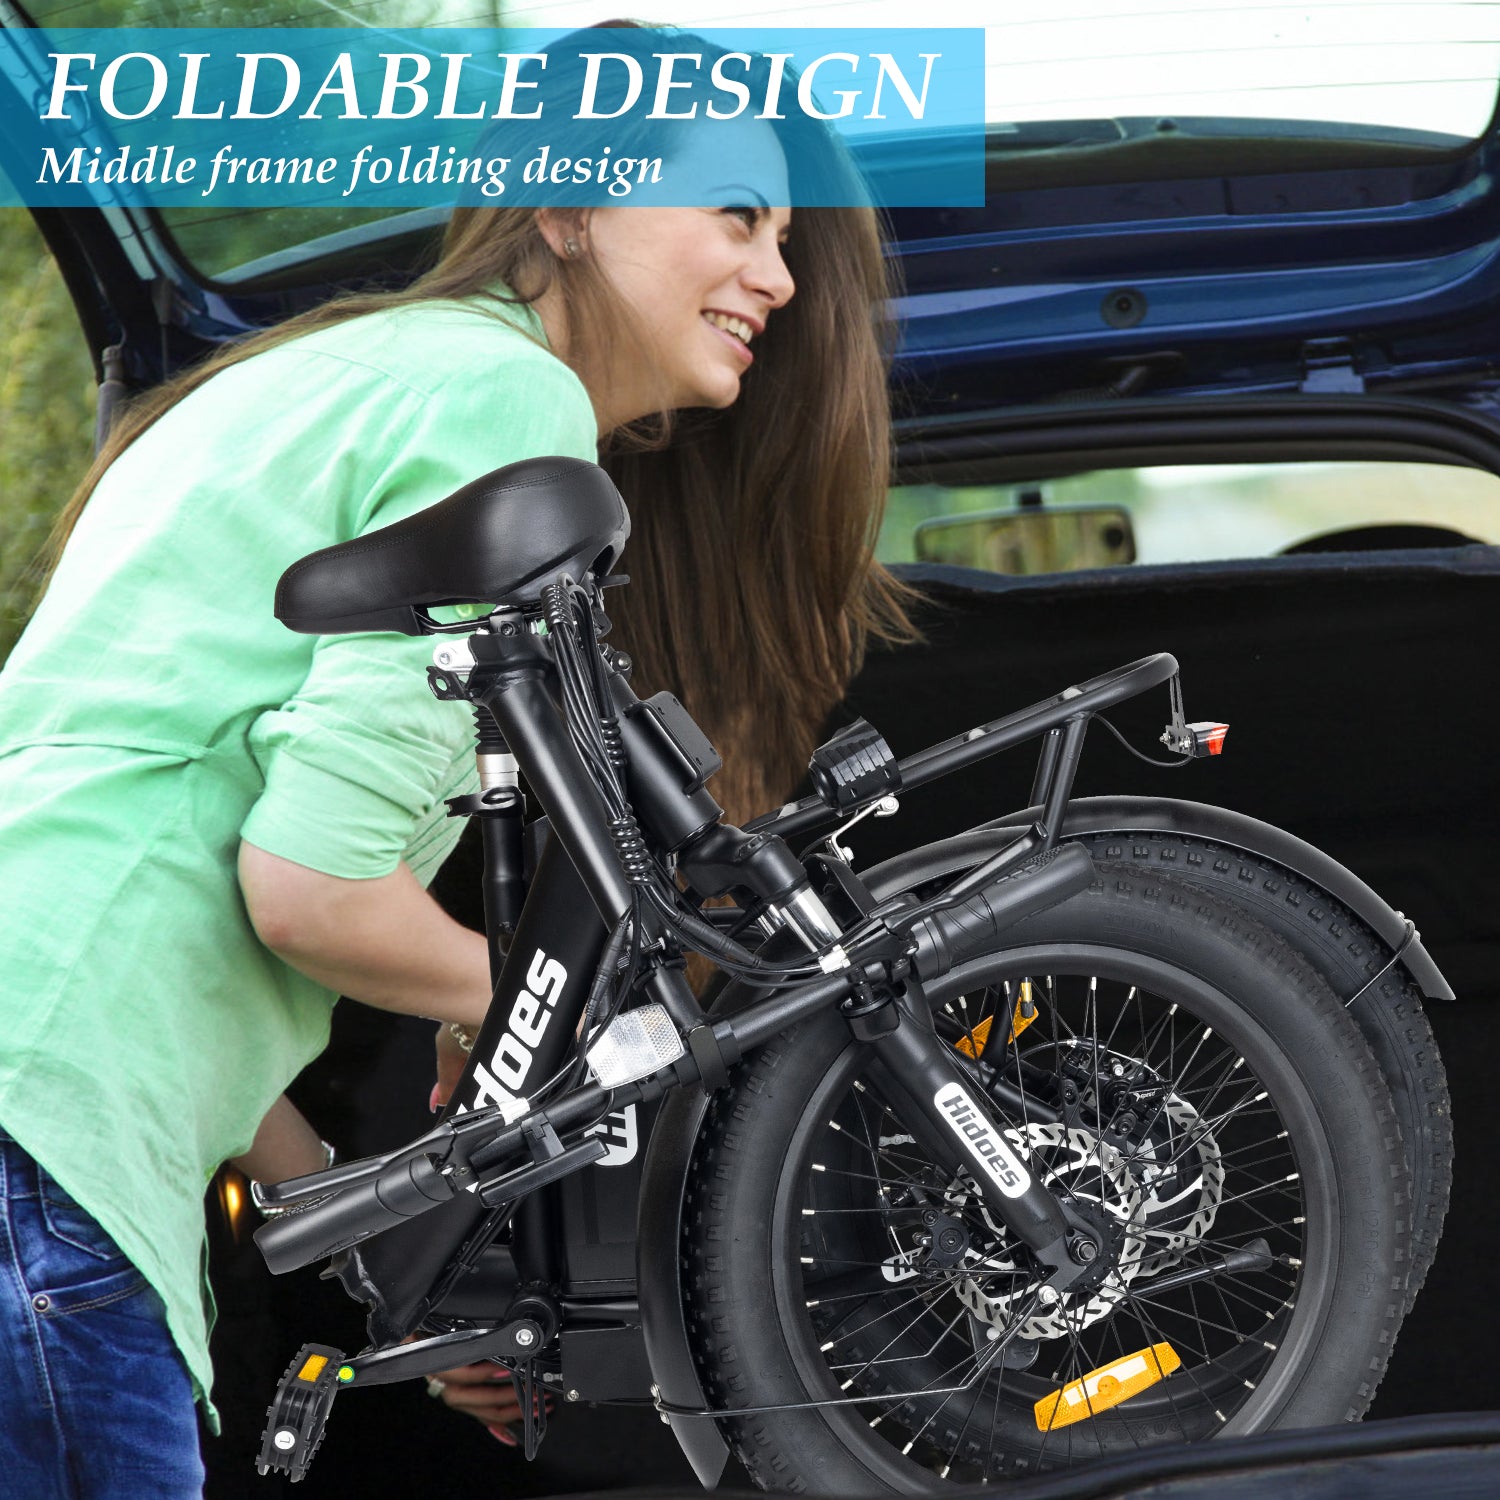 Hidoes C2 Folding electric bike for commuting folding desing, easy to stock and carry